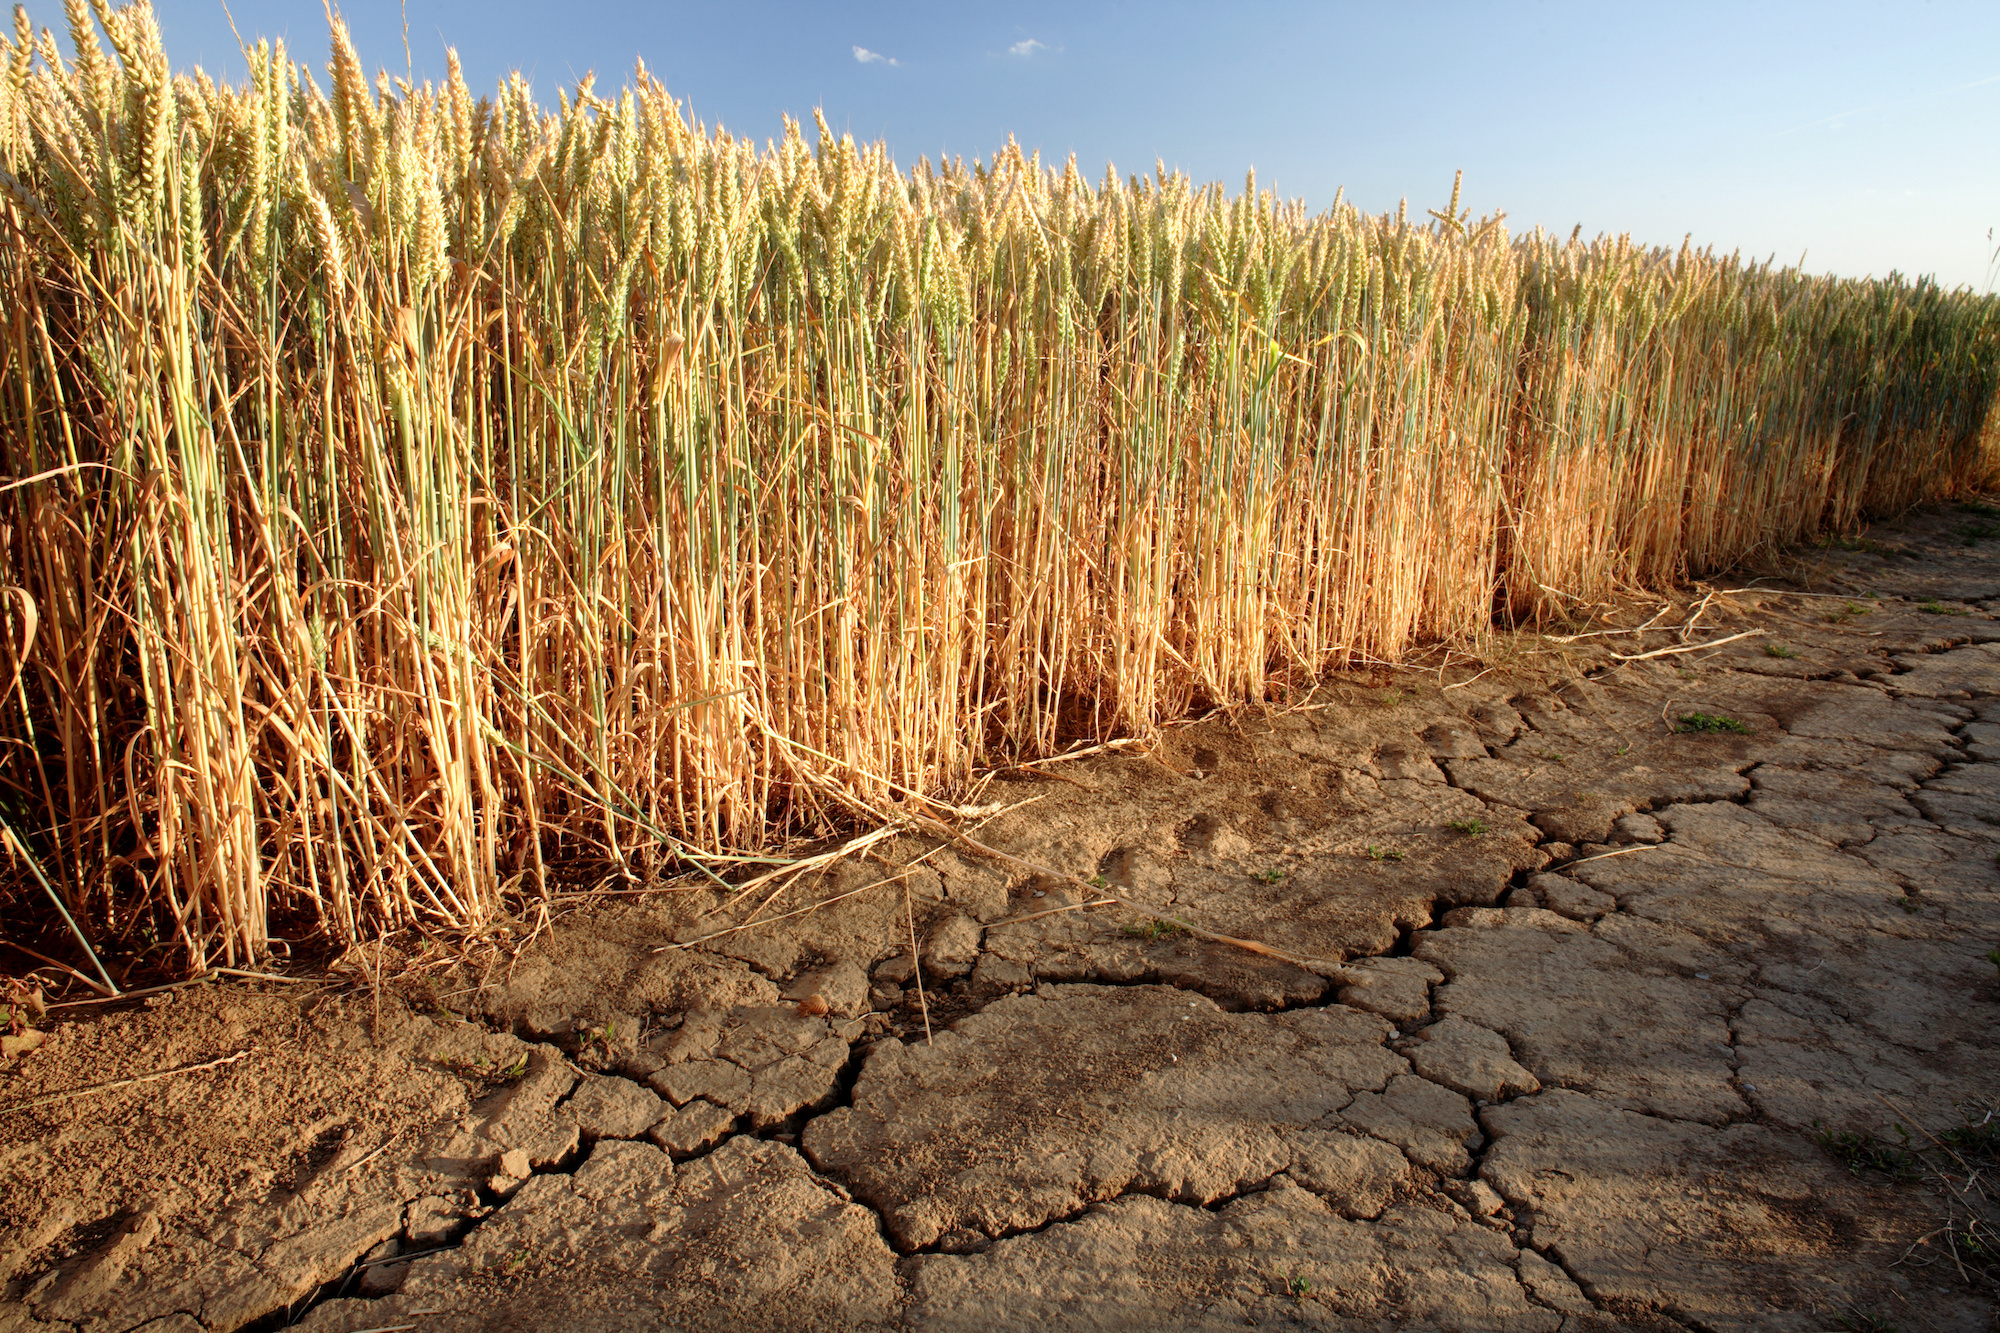 Increased stress tolerance to droughts is becoming more important in the face of climate change. (Image: Adobe Stock)